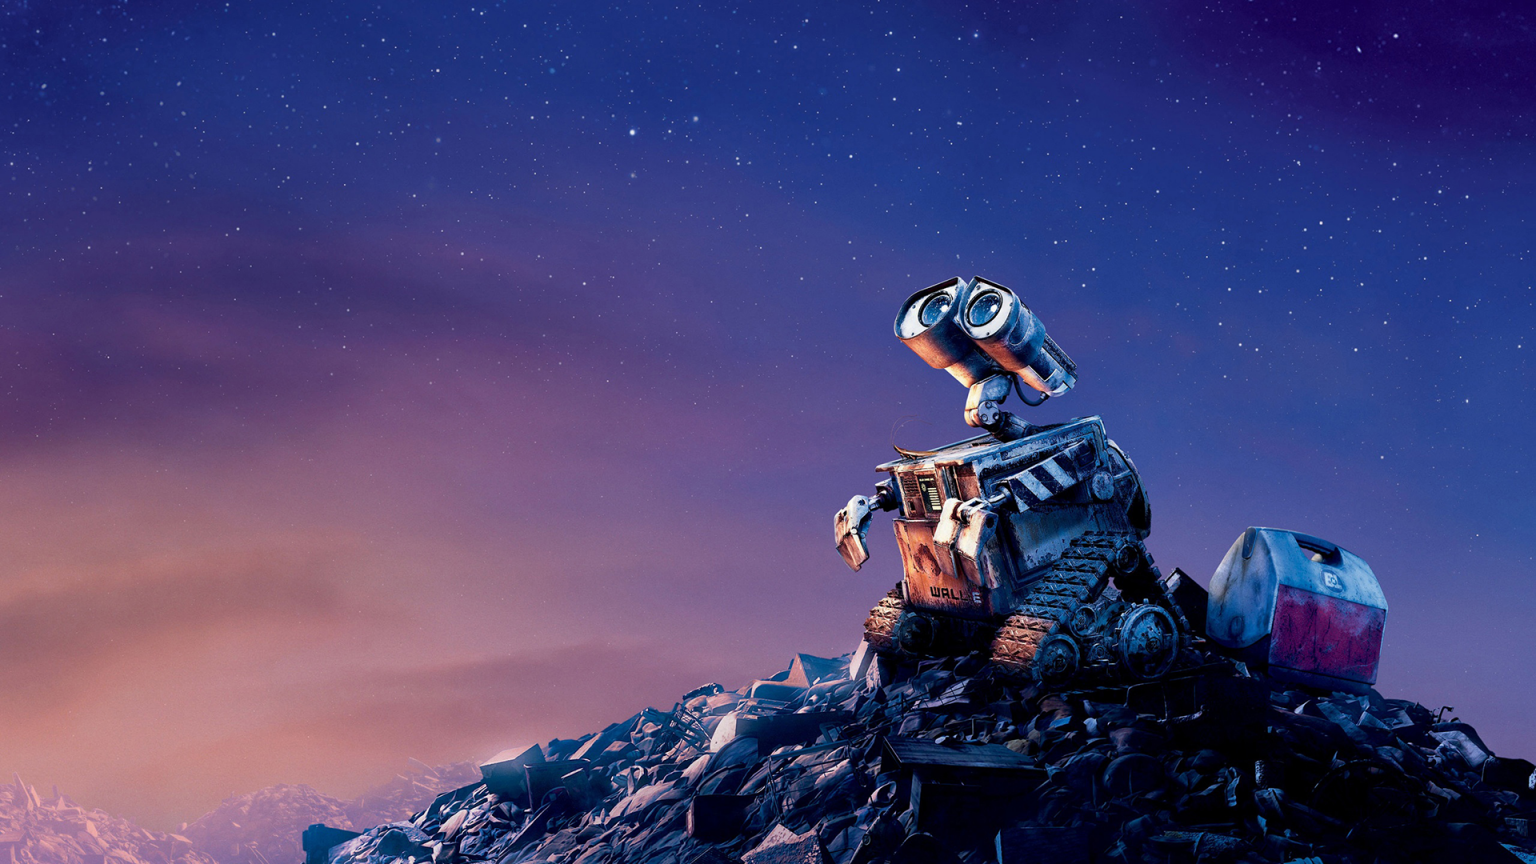 Wall-E for 1536 x 864 HDTV resolution